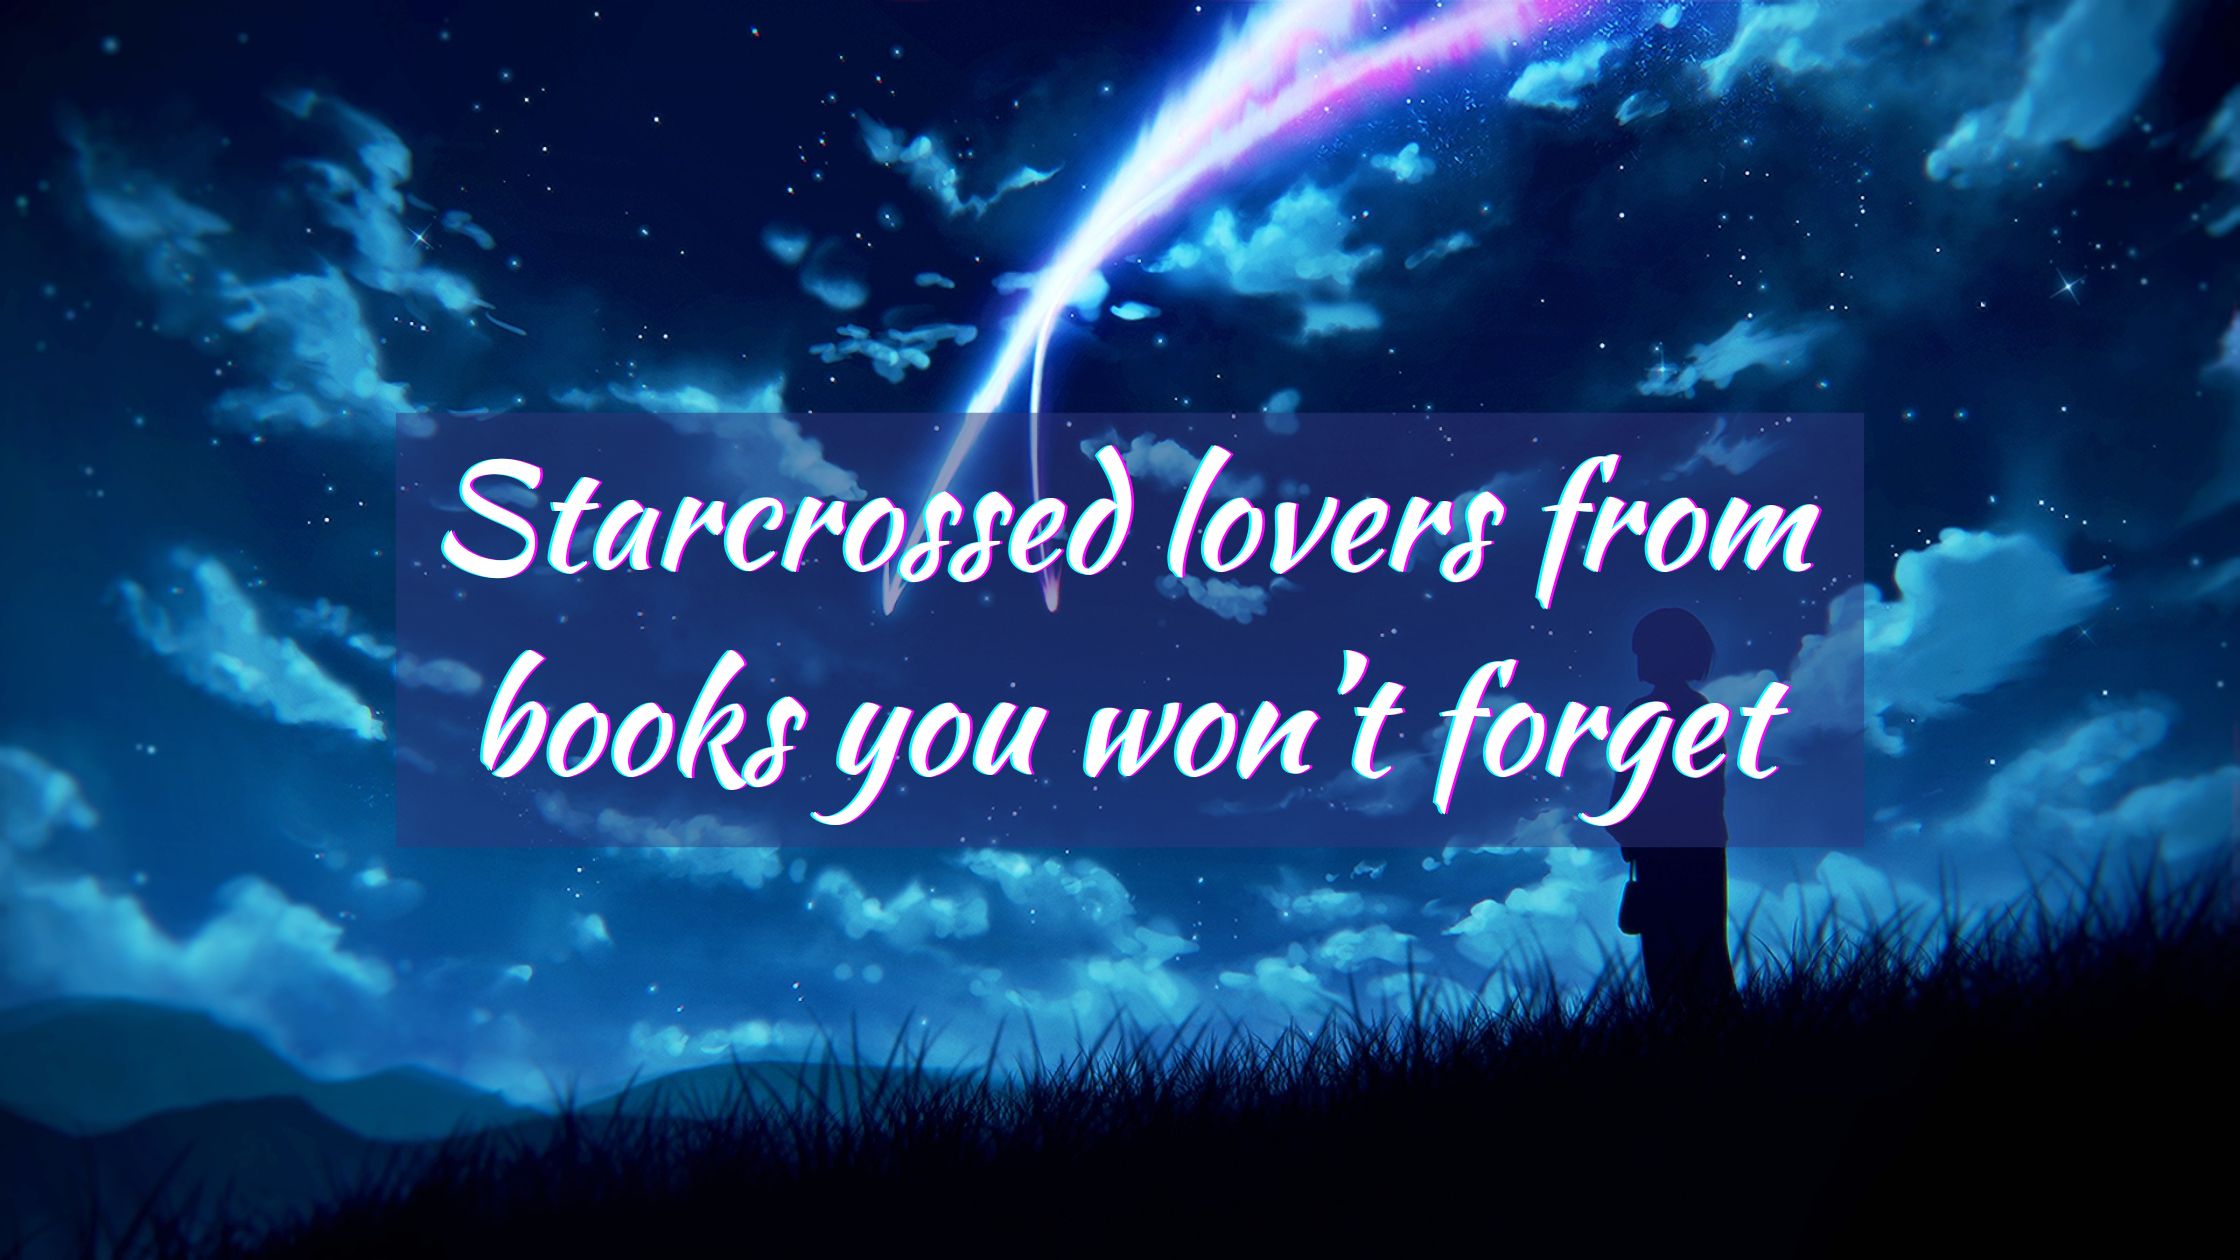 Star-crossed lovers from books you won’t forget